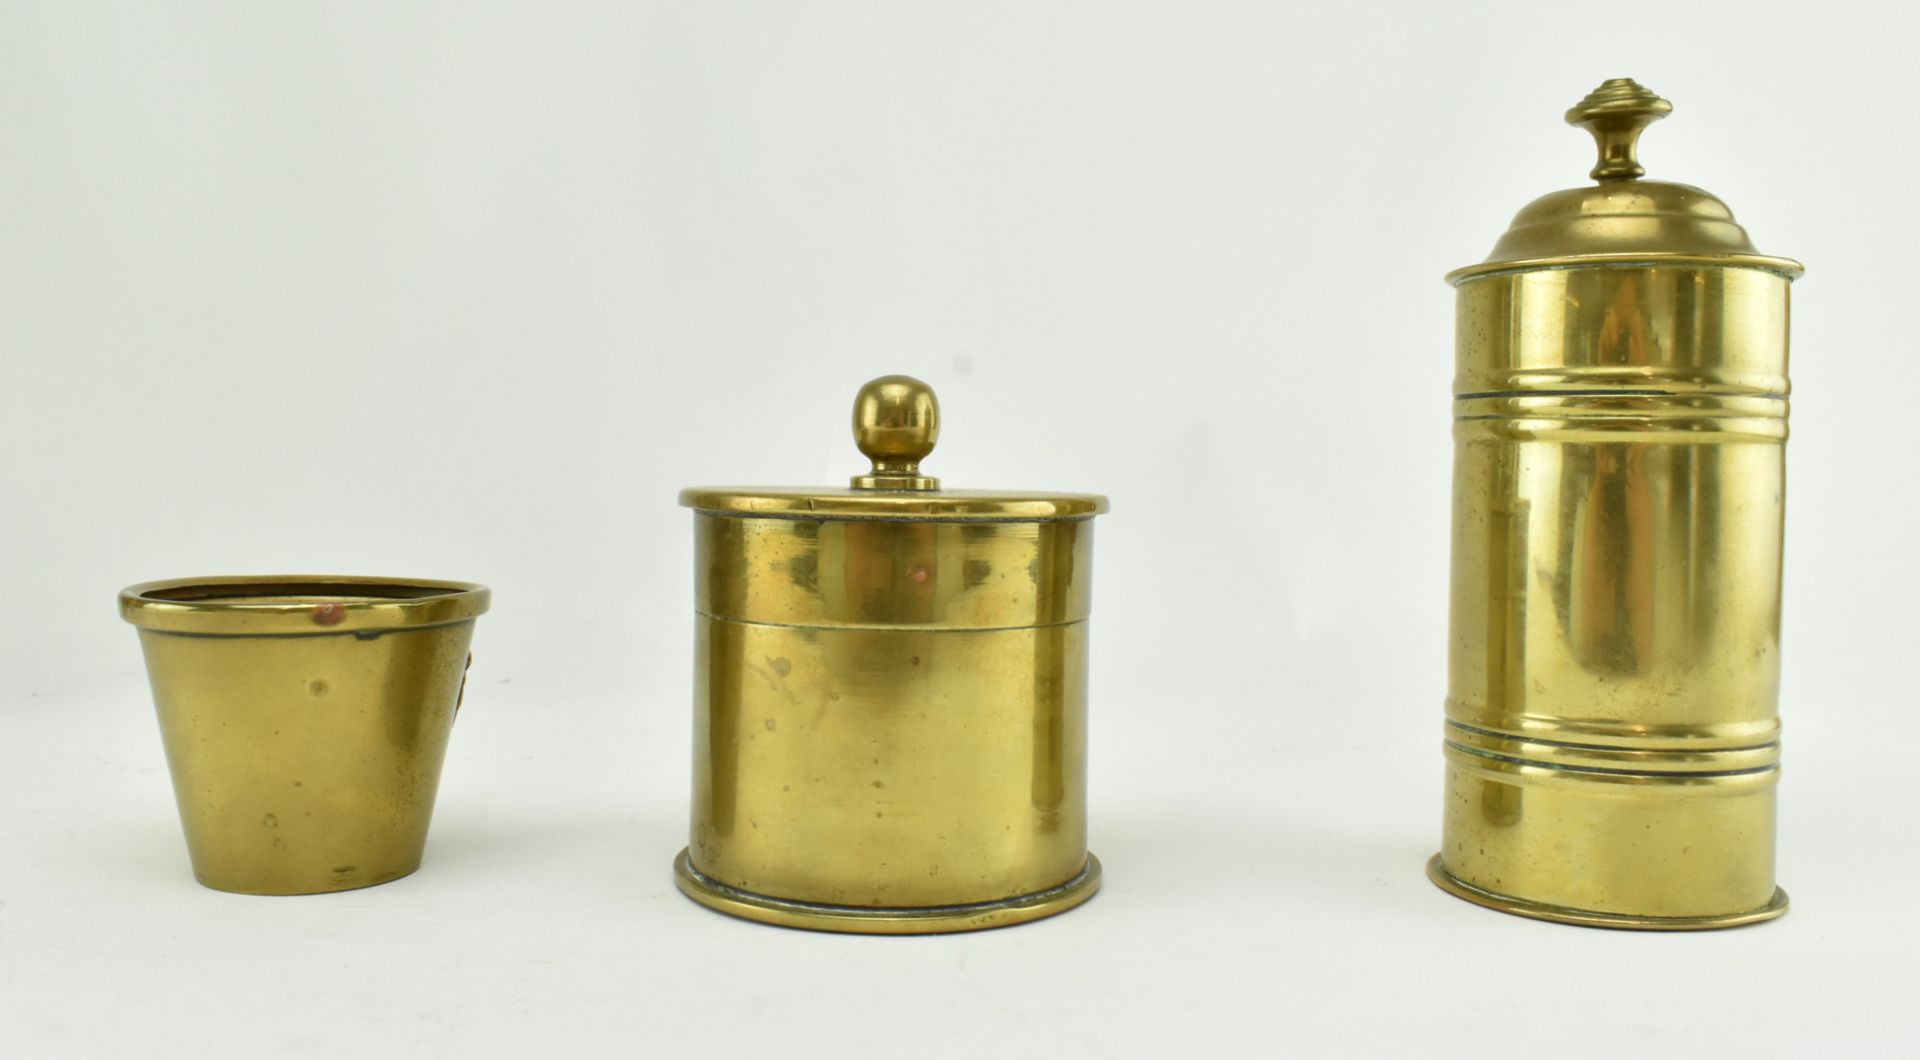 TRENCH ART - COLLECTION OF SIX WWI REPURPOSED ARTILLERY SHELL - Image 4 of 9